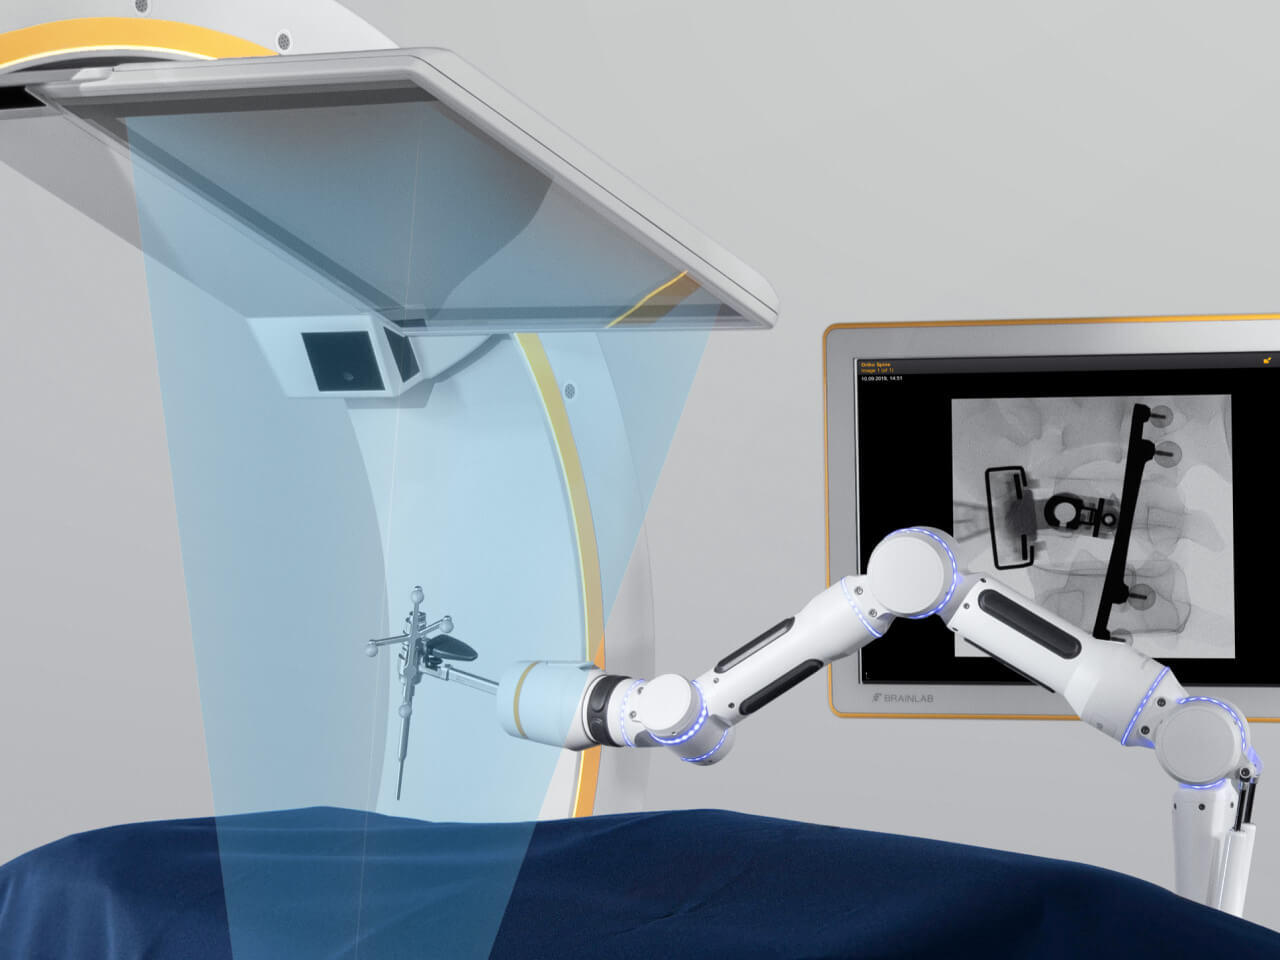 Brainlab Loop-X conebeam-ct instrument guided imaging for screw placement verification